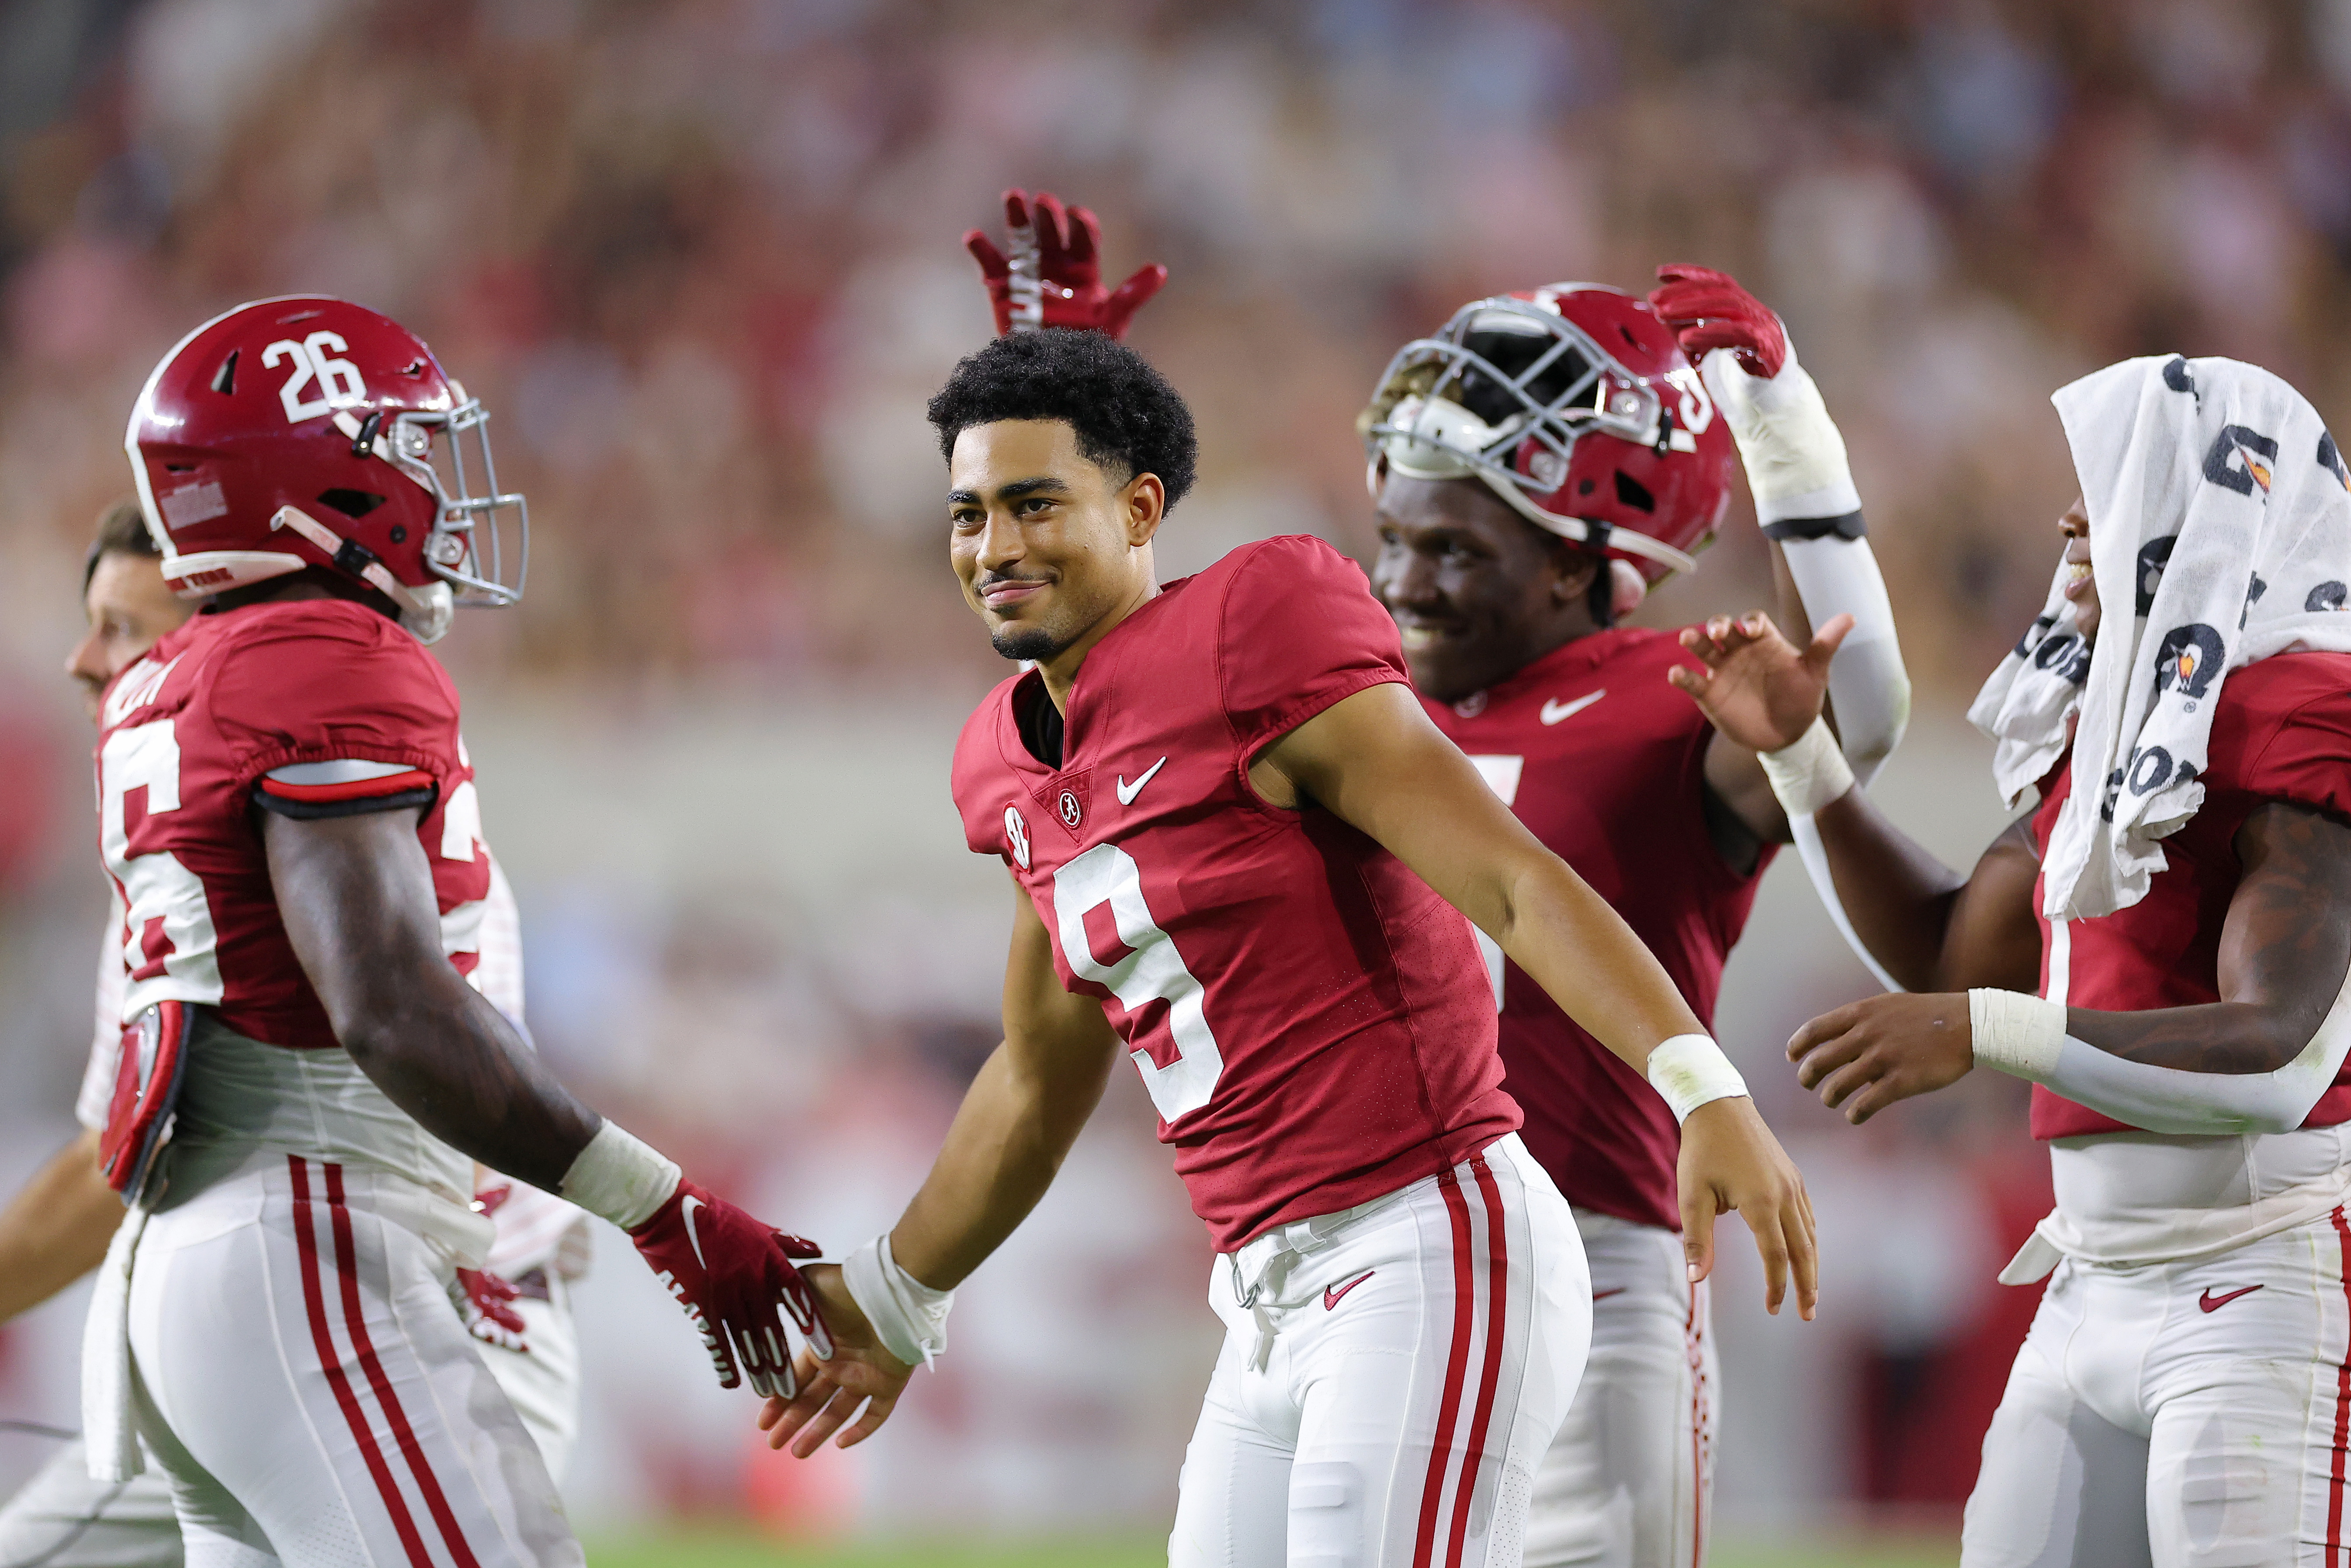 Bryce Young of the Alabama Crimson Tide celebrates with teammate Jamarion Miller #26 after a touchdown during the second half of the game at Bryant-Denny Stadium on September 24, 2022 in Tuscaloosa, Alabama.